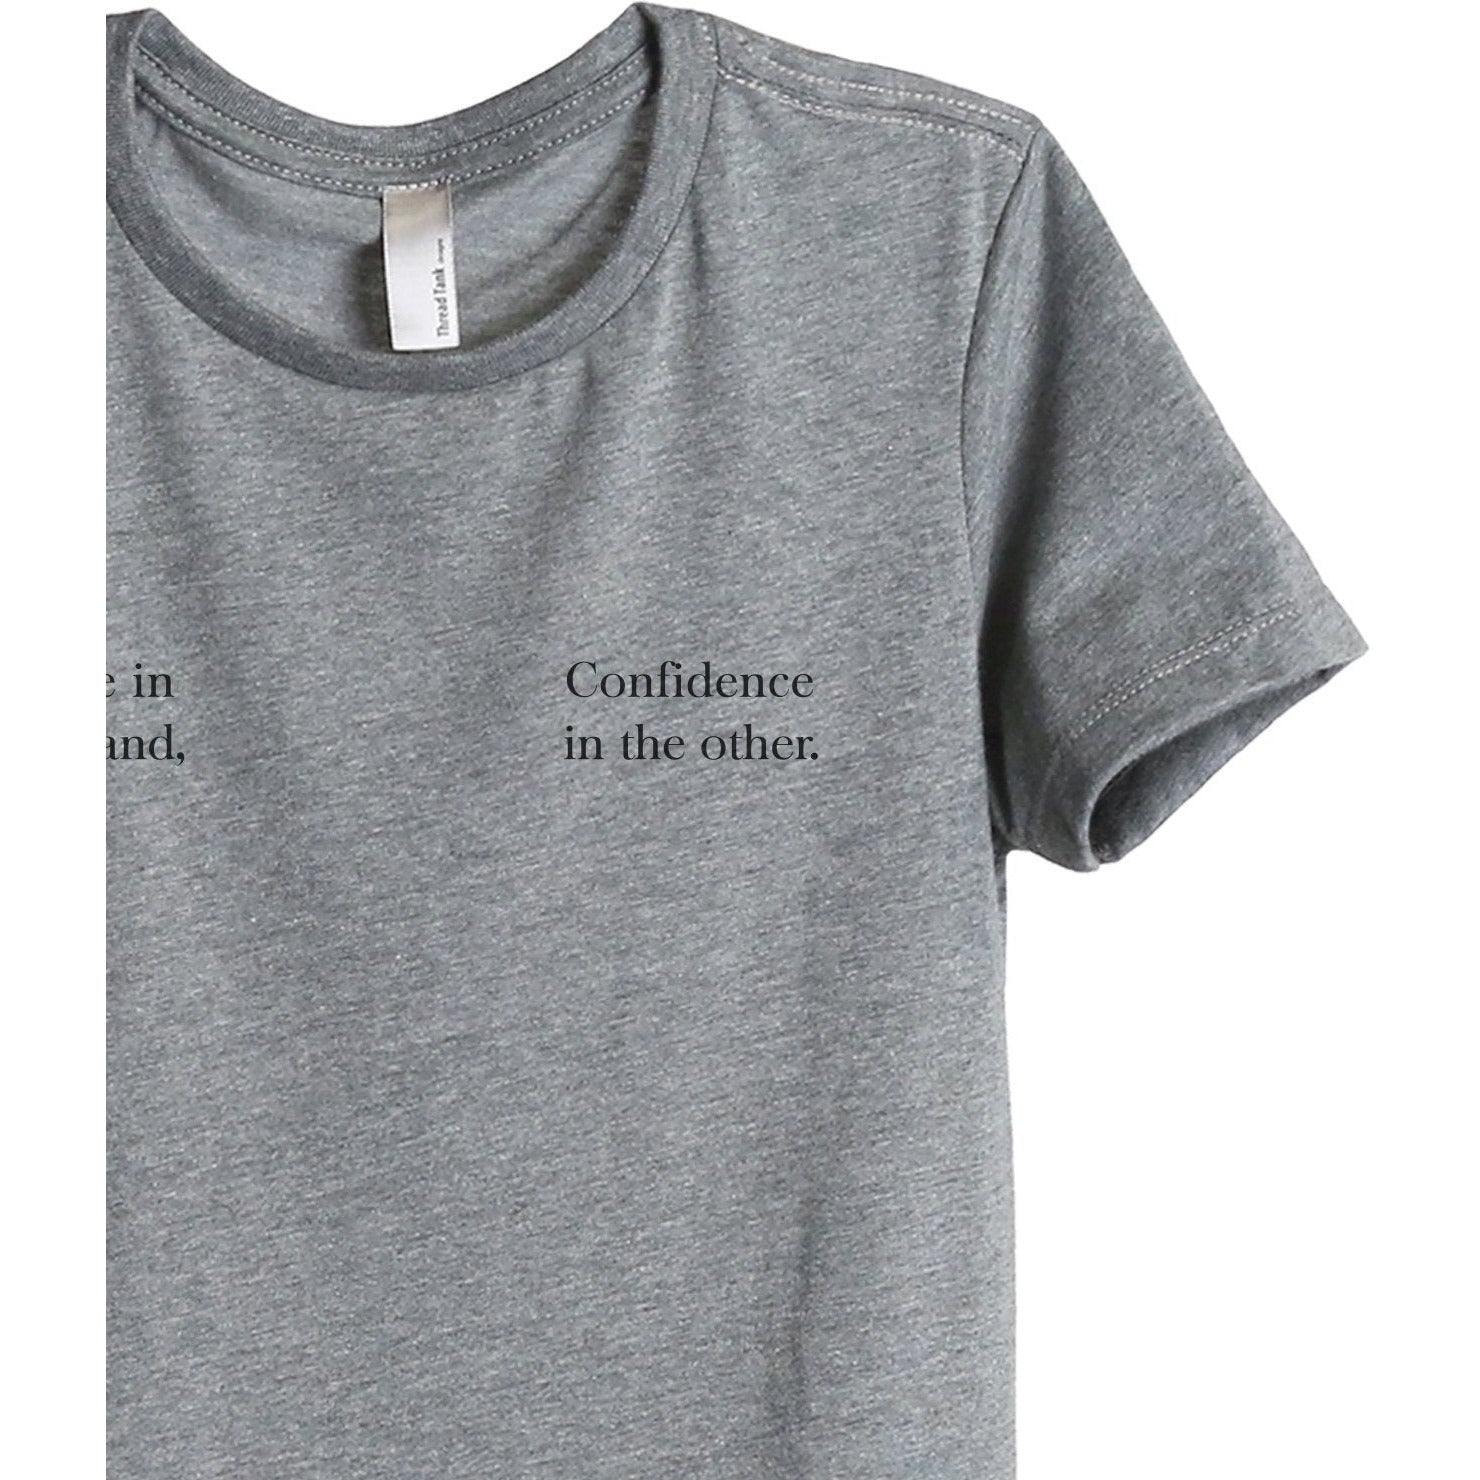 Coffee In One Hand Confidence Other Women's Relaxed Crewneck T-Shirt Top Tee Heather Grey Zoom Details
